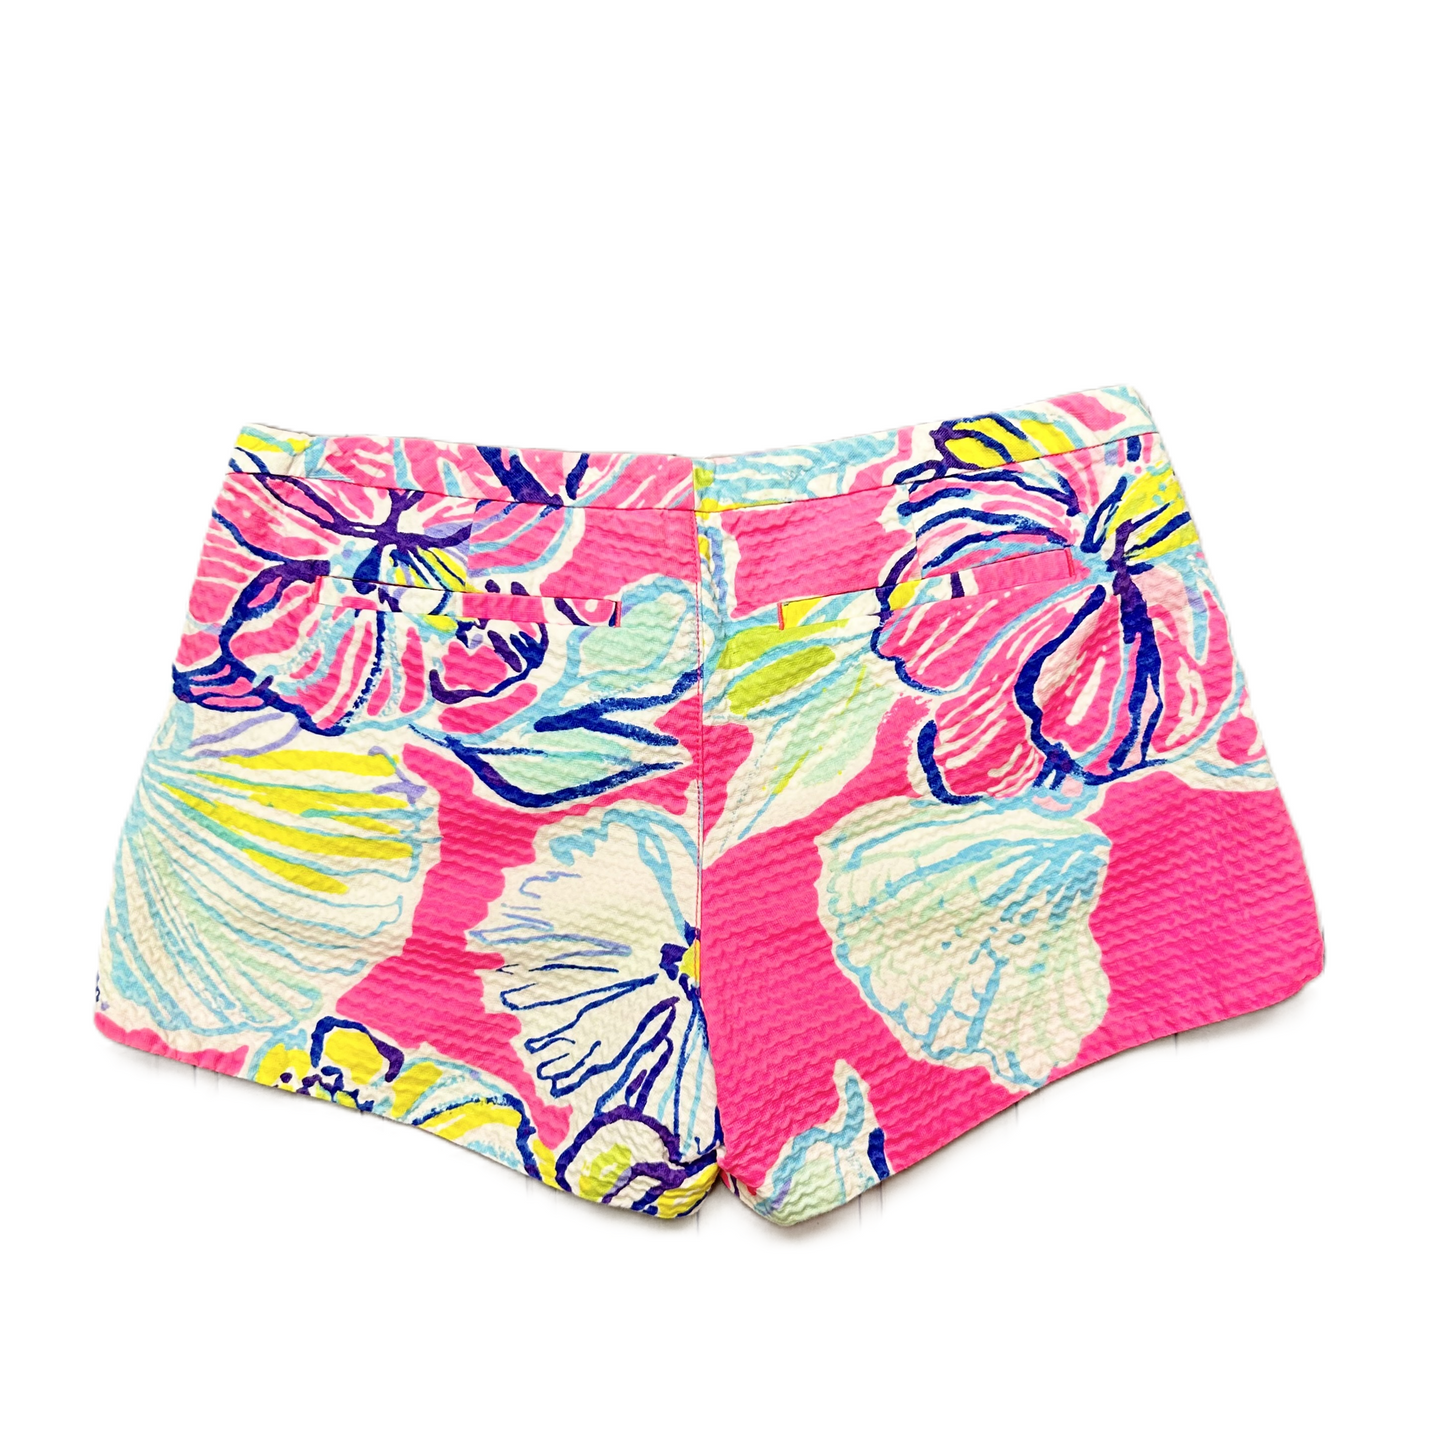 Pink Shorts By Lilly Pulitzer, Size: 2